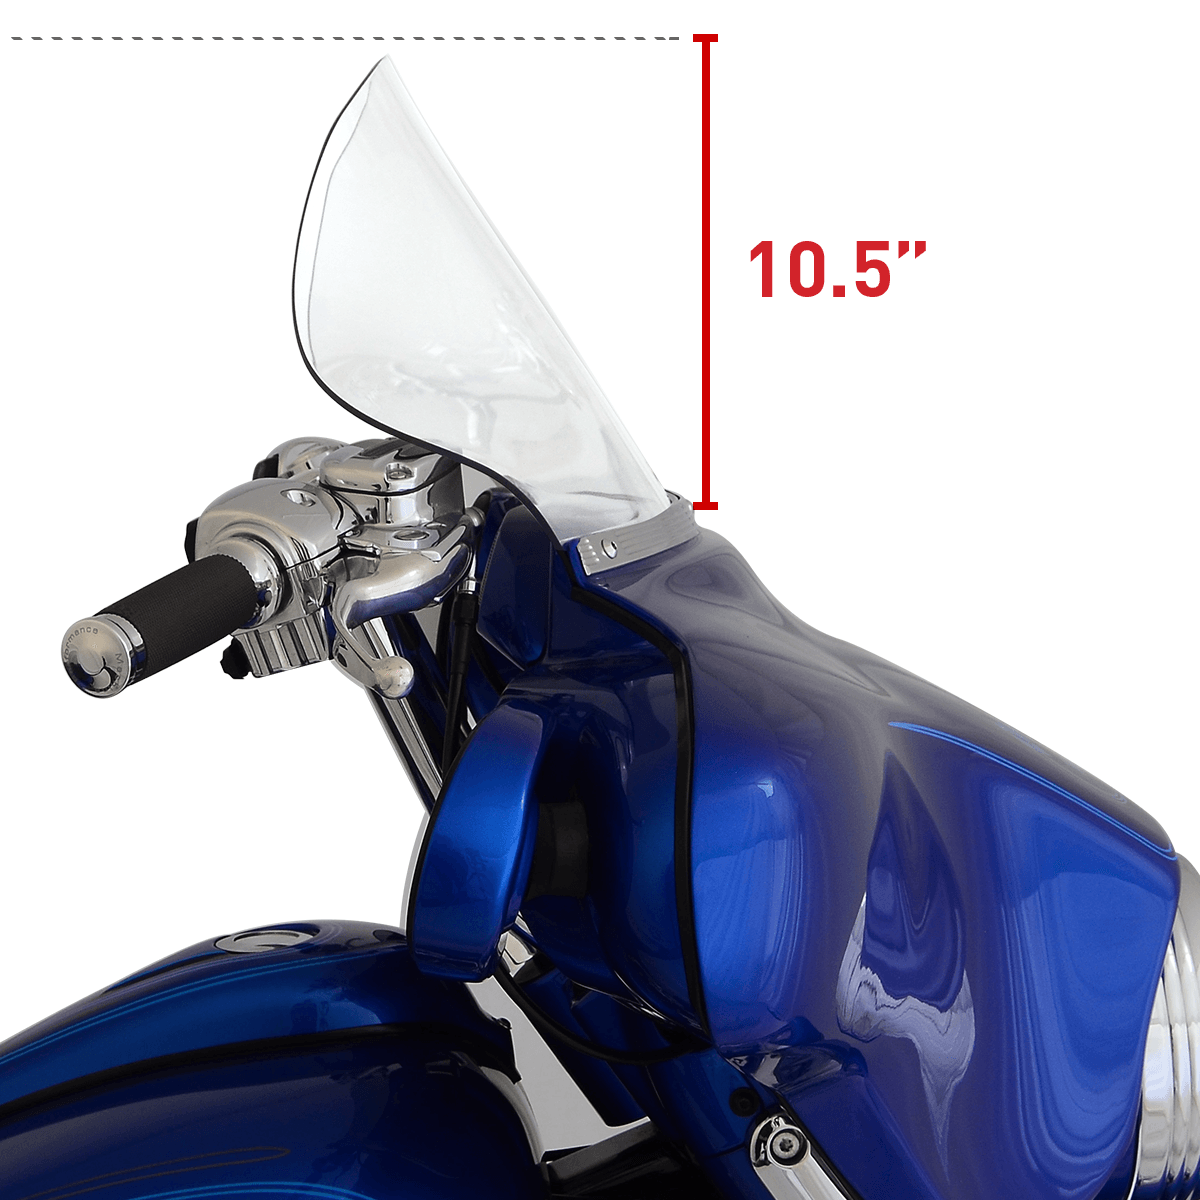 11.5" Clear Flare™ Windshield for Harley-Davidson 1996-2013 FLH